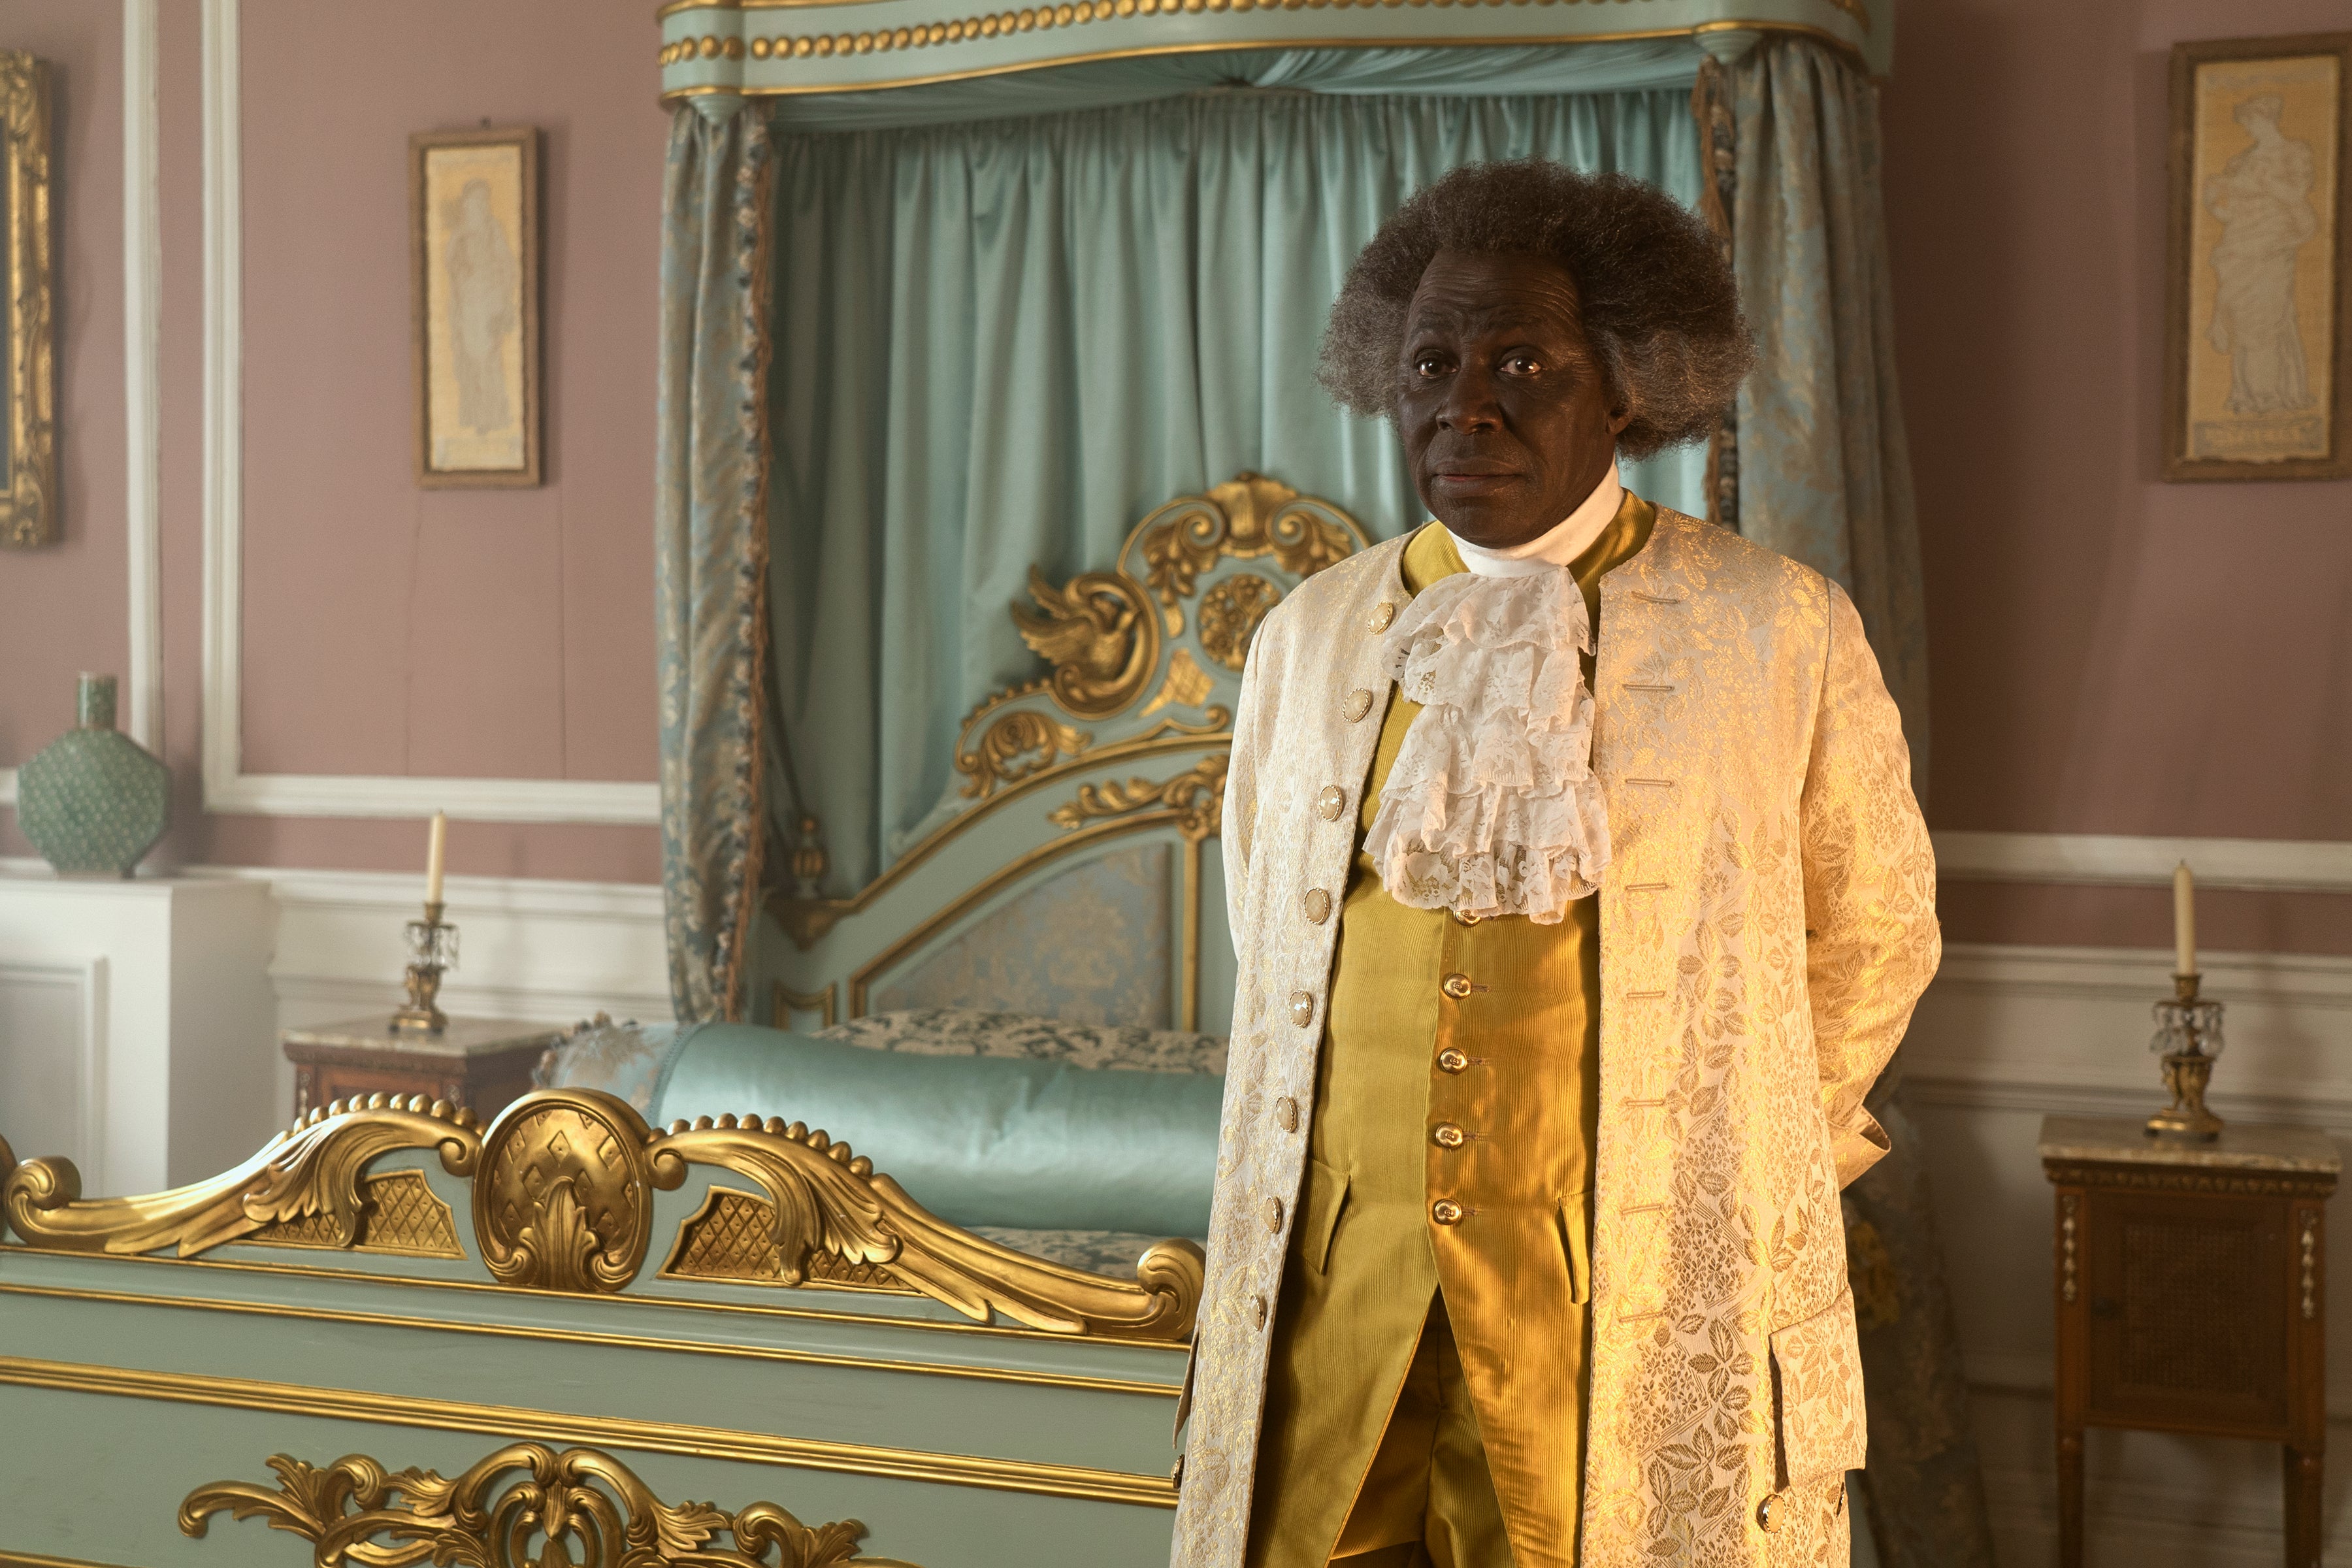 A Black man with gray hair stands next to a bed and wears a gold-colored Georgian suit.